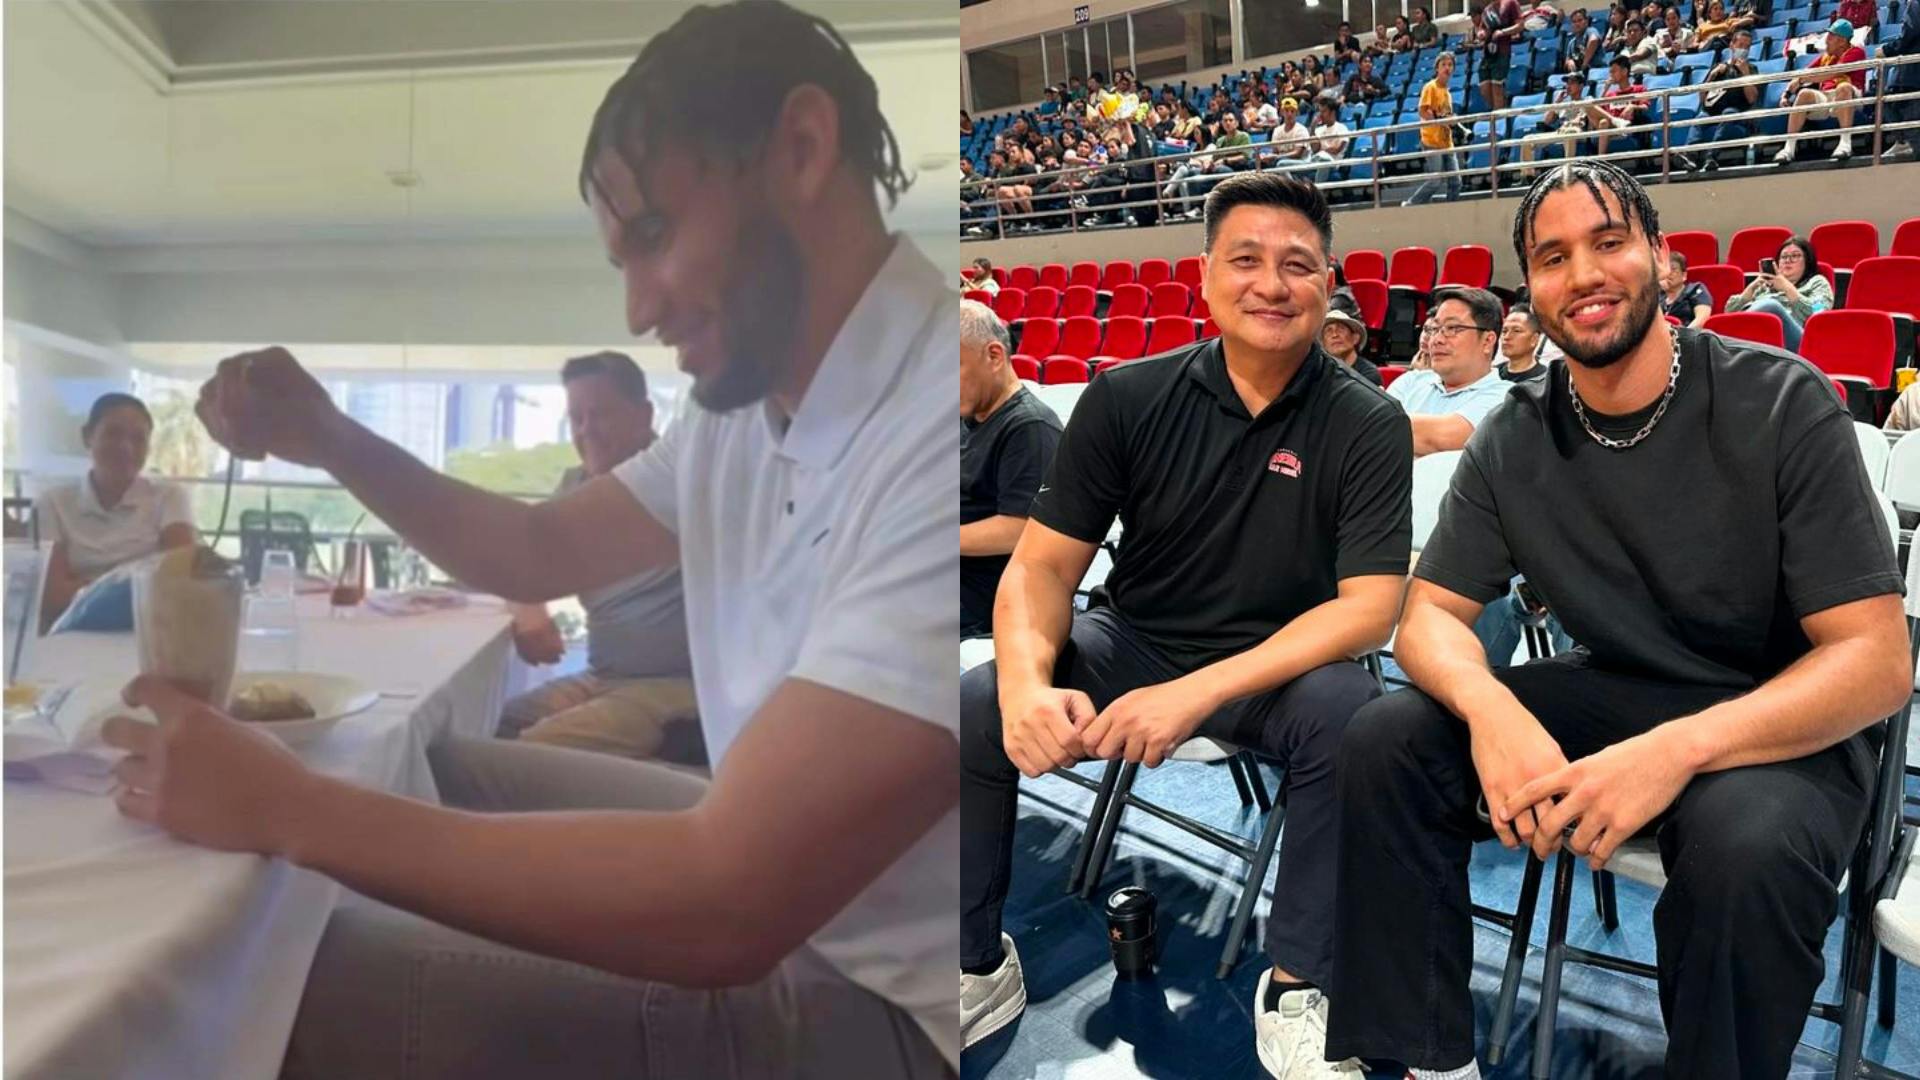 San Miguel’s import Bennie Boatwright got Pinoy taste with Halo-Halo 